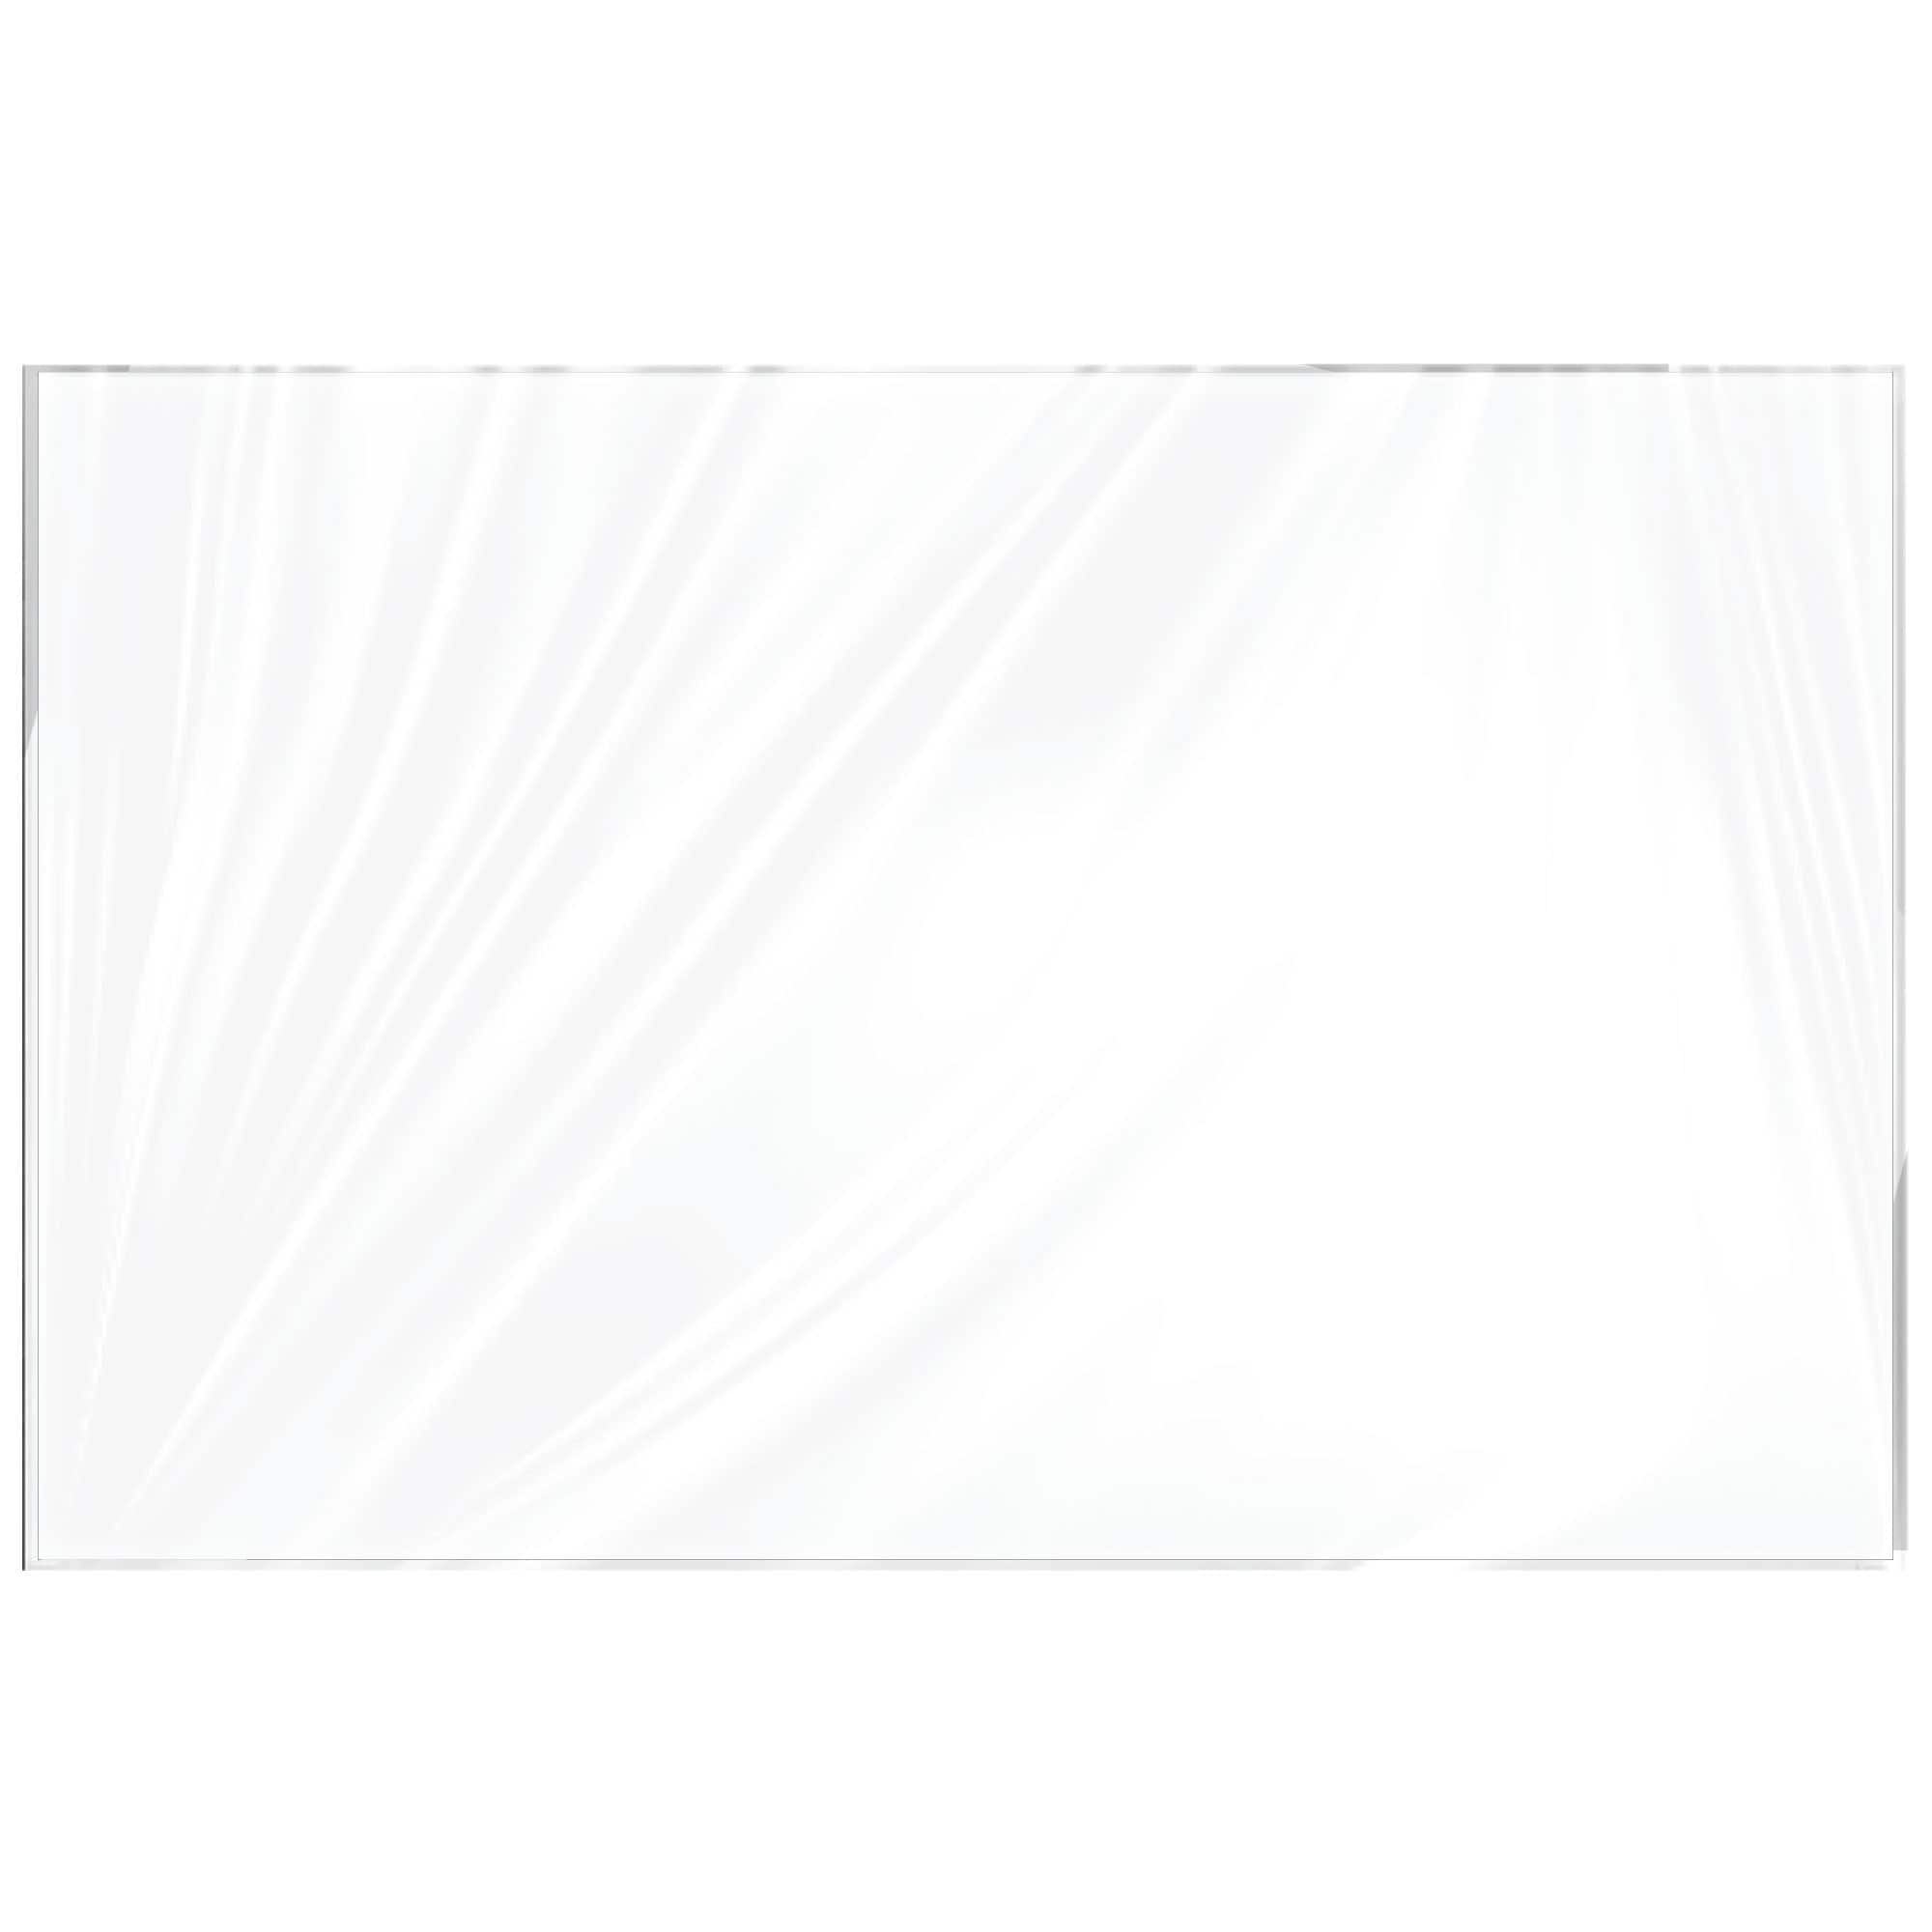 ArtSkills&#xAE; 14&#x22; x 22&#x22; White 64ct. Value Pack Poster Boards